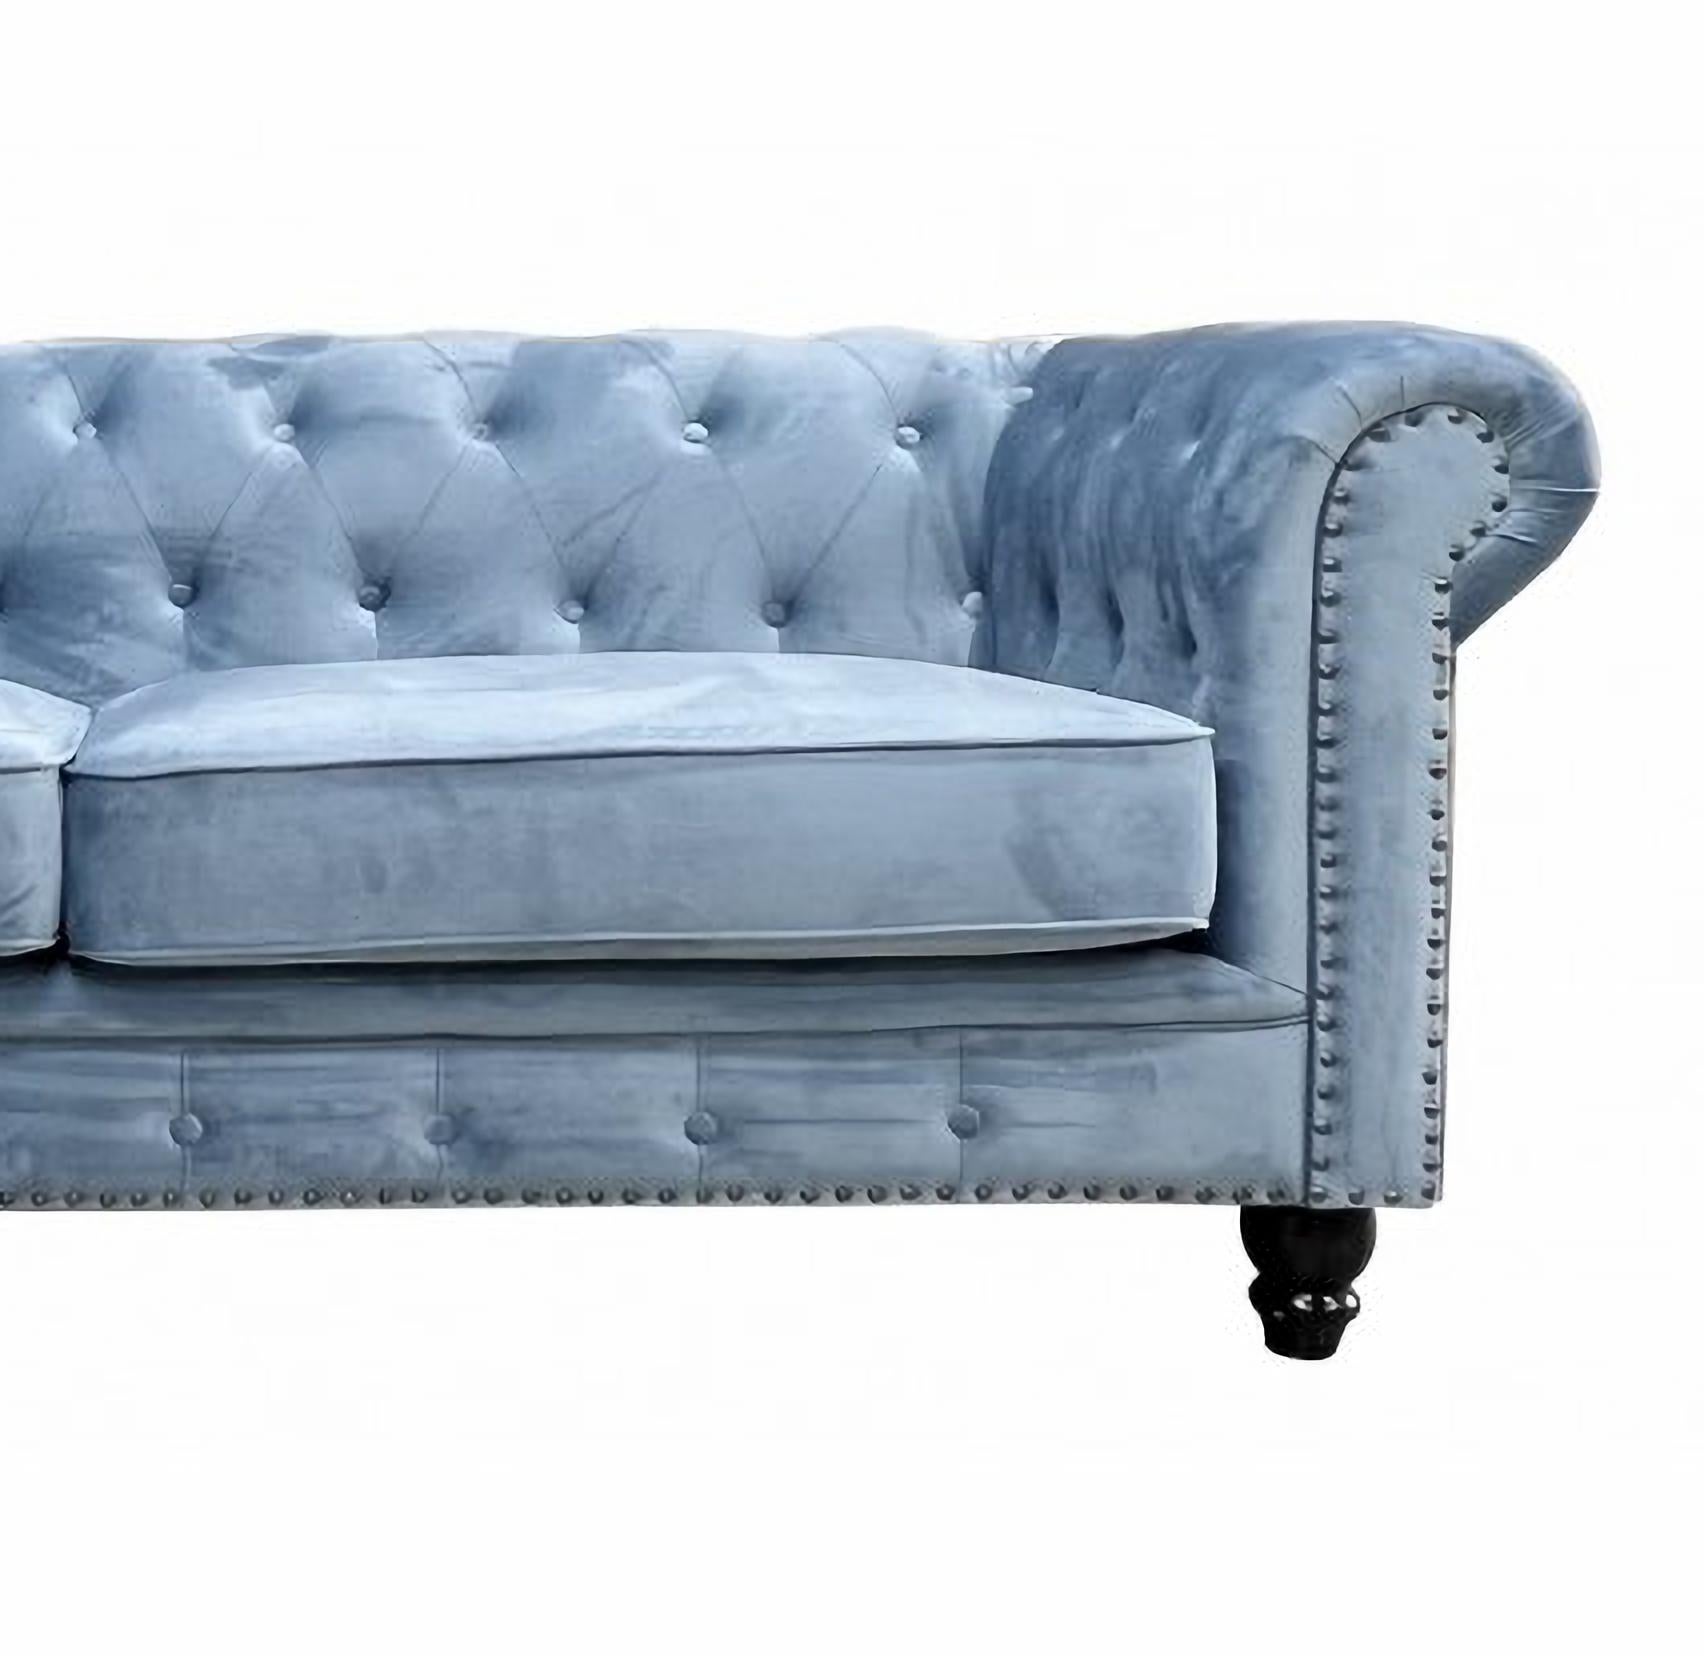 Chester Premium 3-seater sofa, dusky blue velvet upholstery

-Design sofa, 3 seats.

-Made with a solid wooden structure.

-High density polyurethane foam.

-Upholstered in navy blue velvet fabric

-2-seater sofa to match,